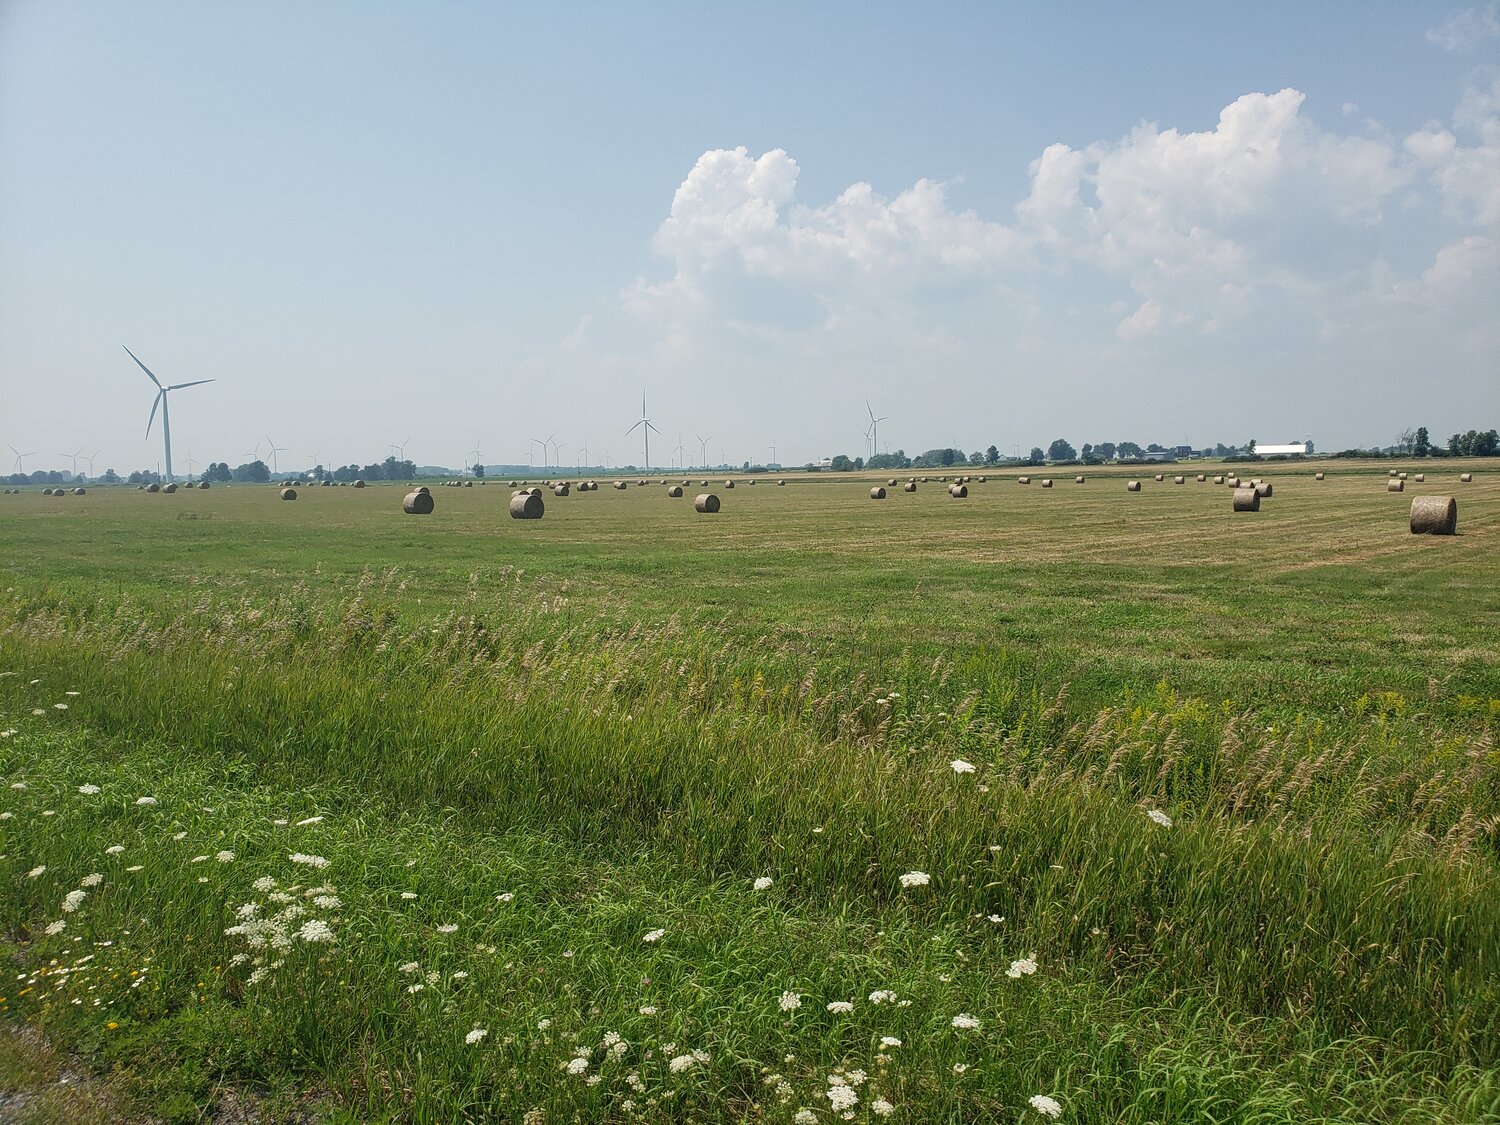 Photo taken by Jeff McGilton whilst biking along Wolfe Island. Alt text: Clouds hang over a large expanse of green fields, peppered with round hay bales, tall windmills and various grasses.